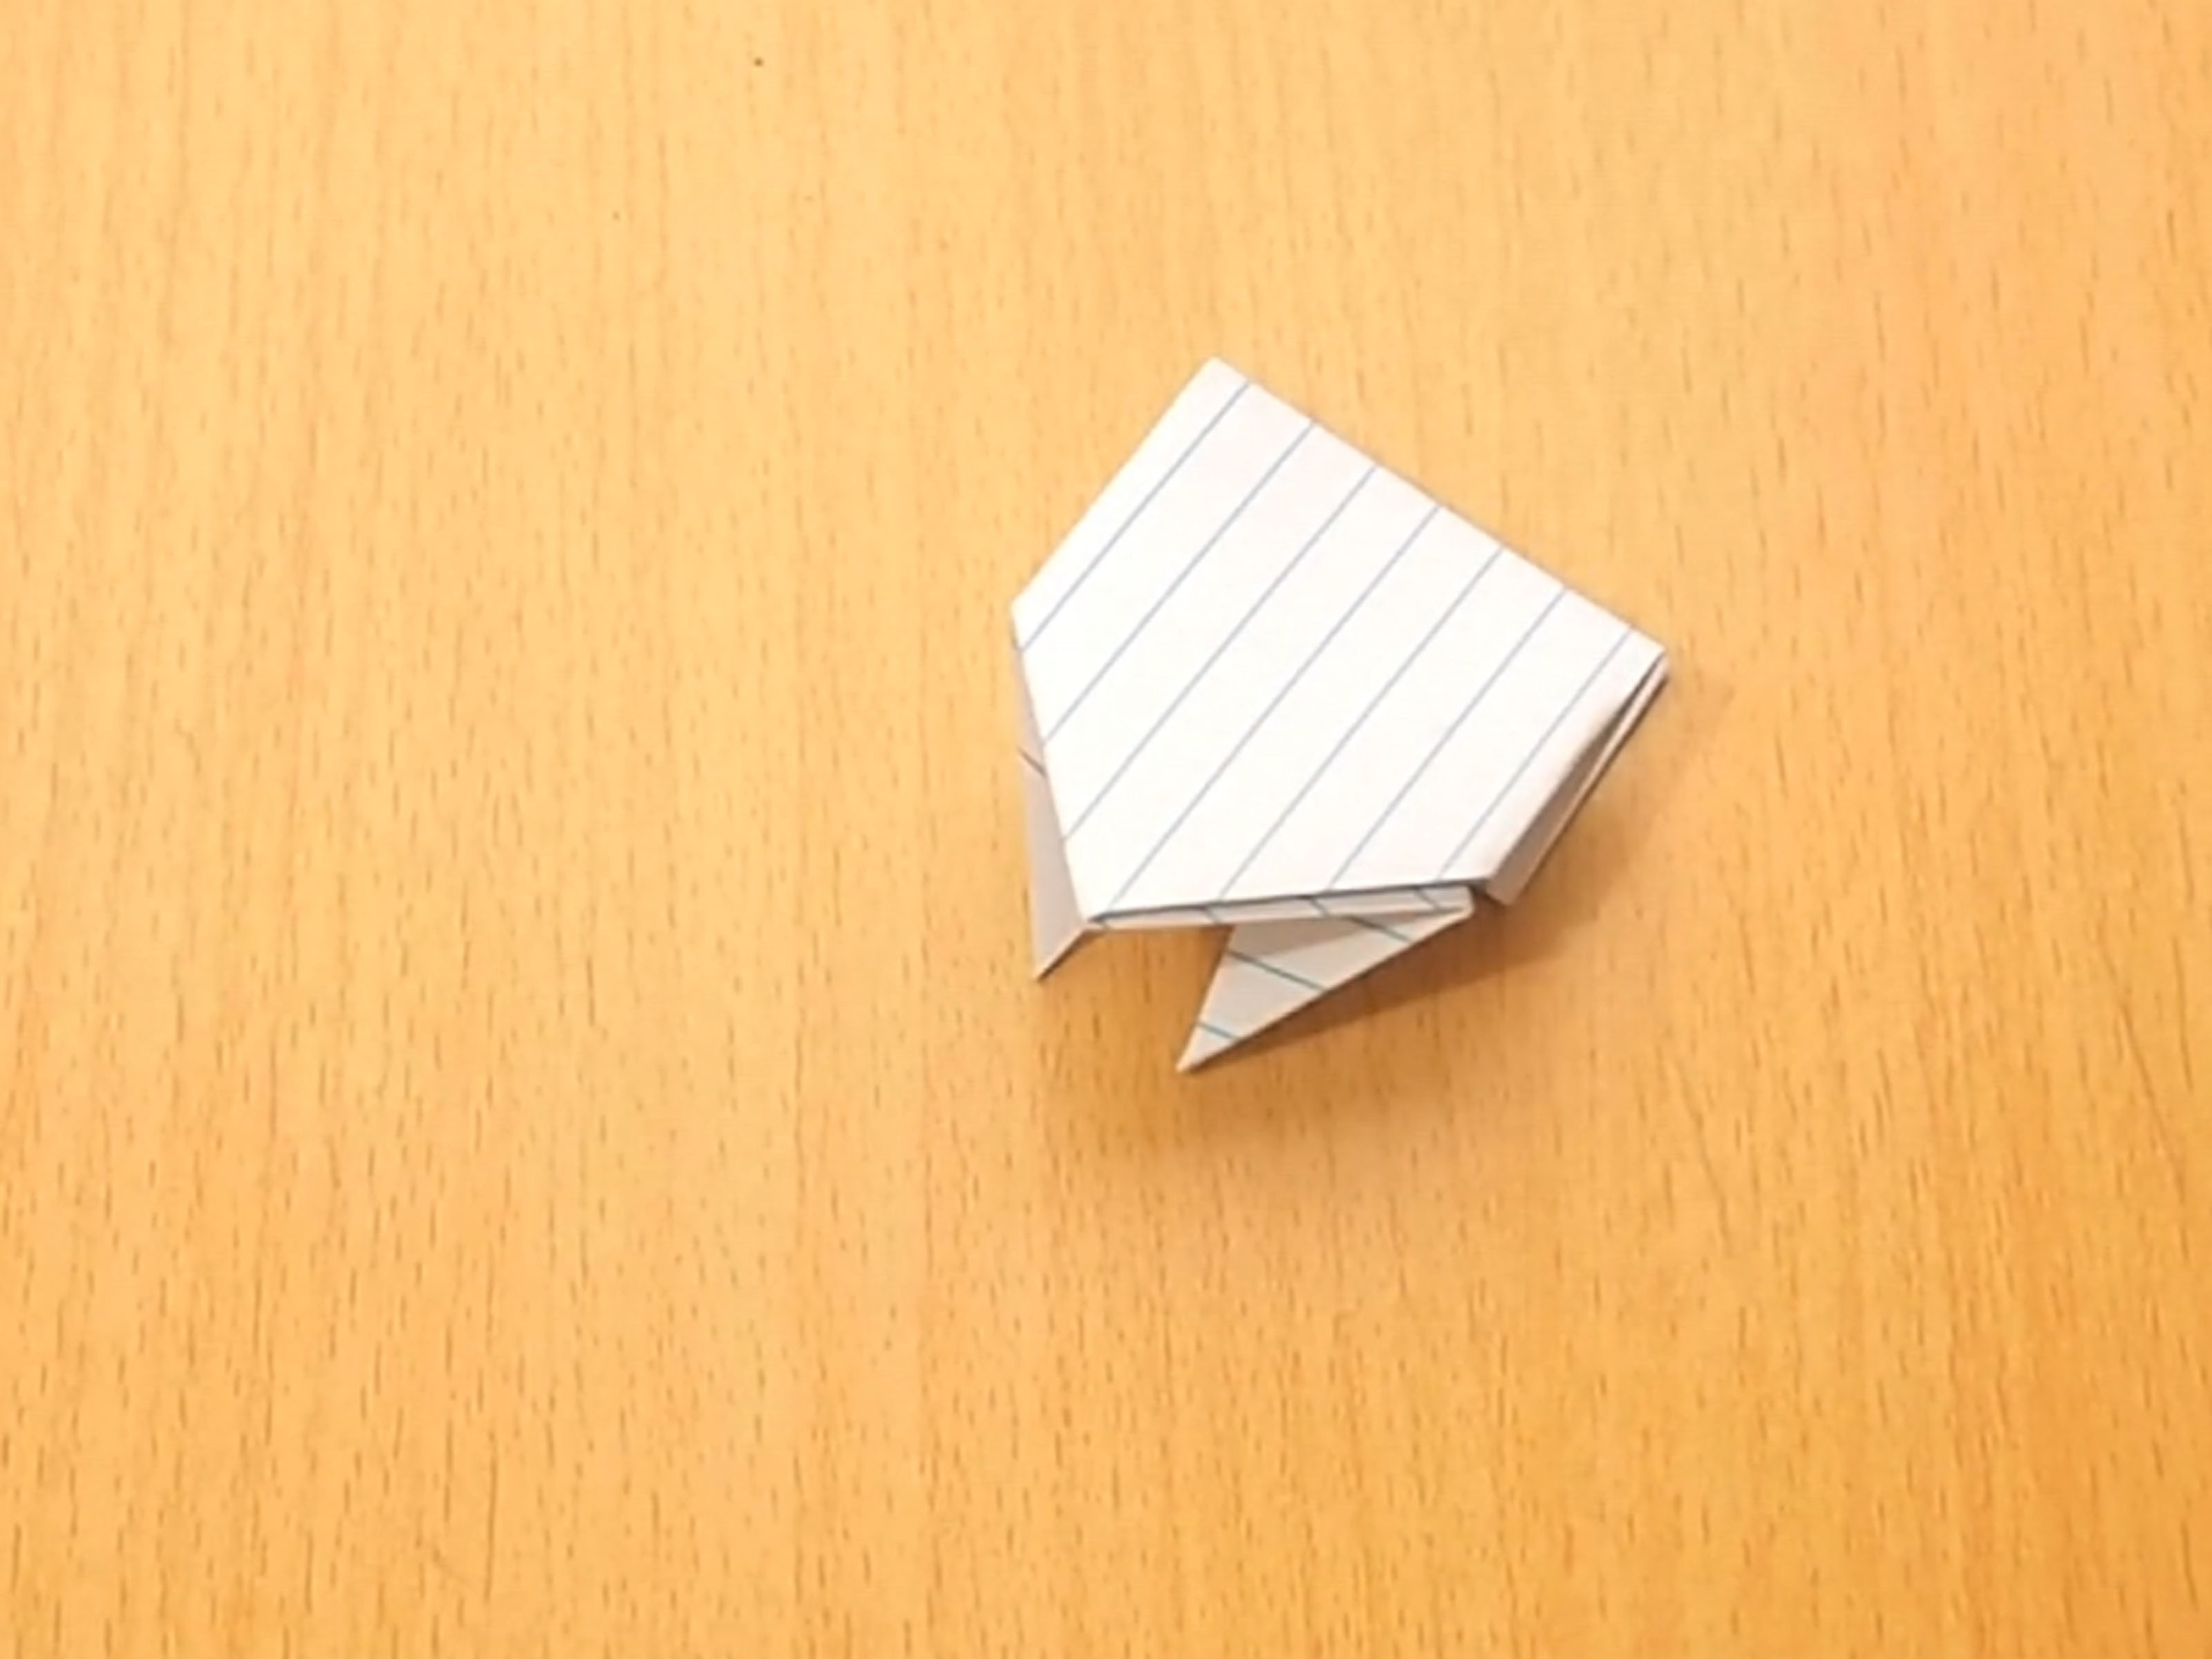 Index Card Origami How To Make An Origami Jumping Frog From An Index Card 10 Steps